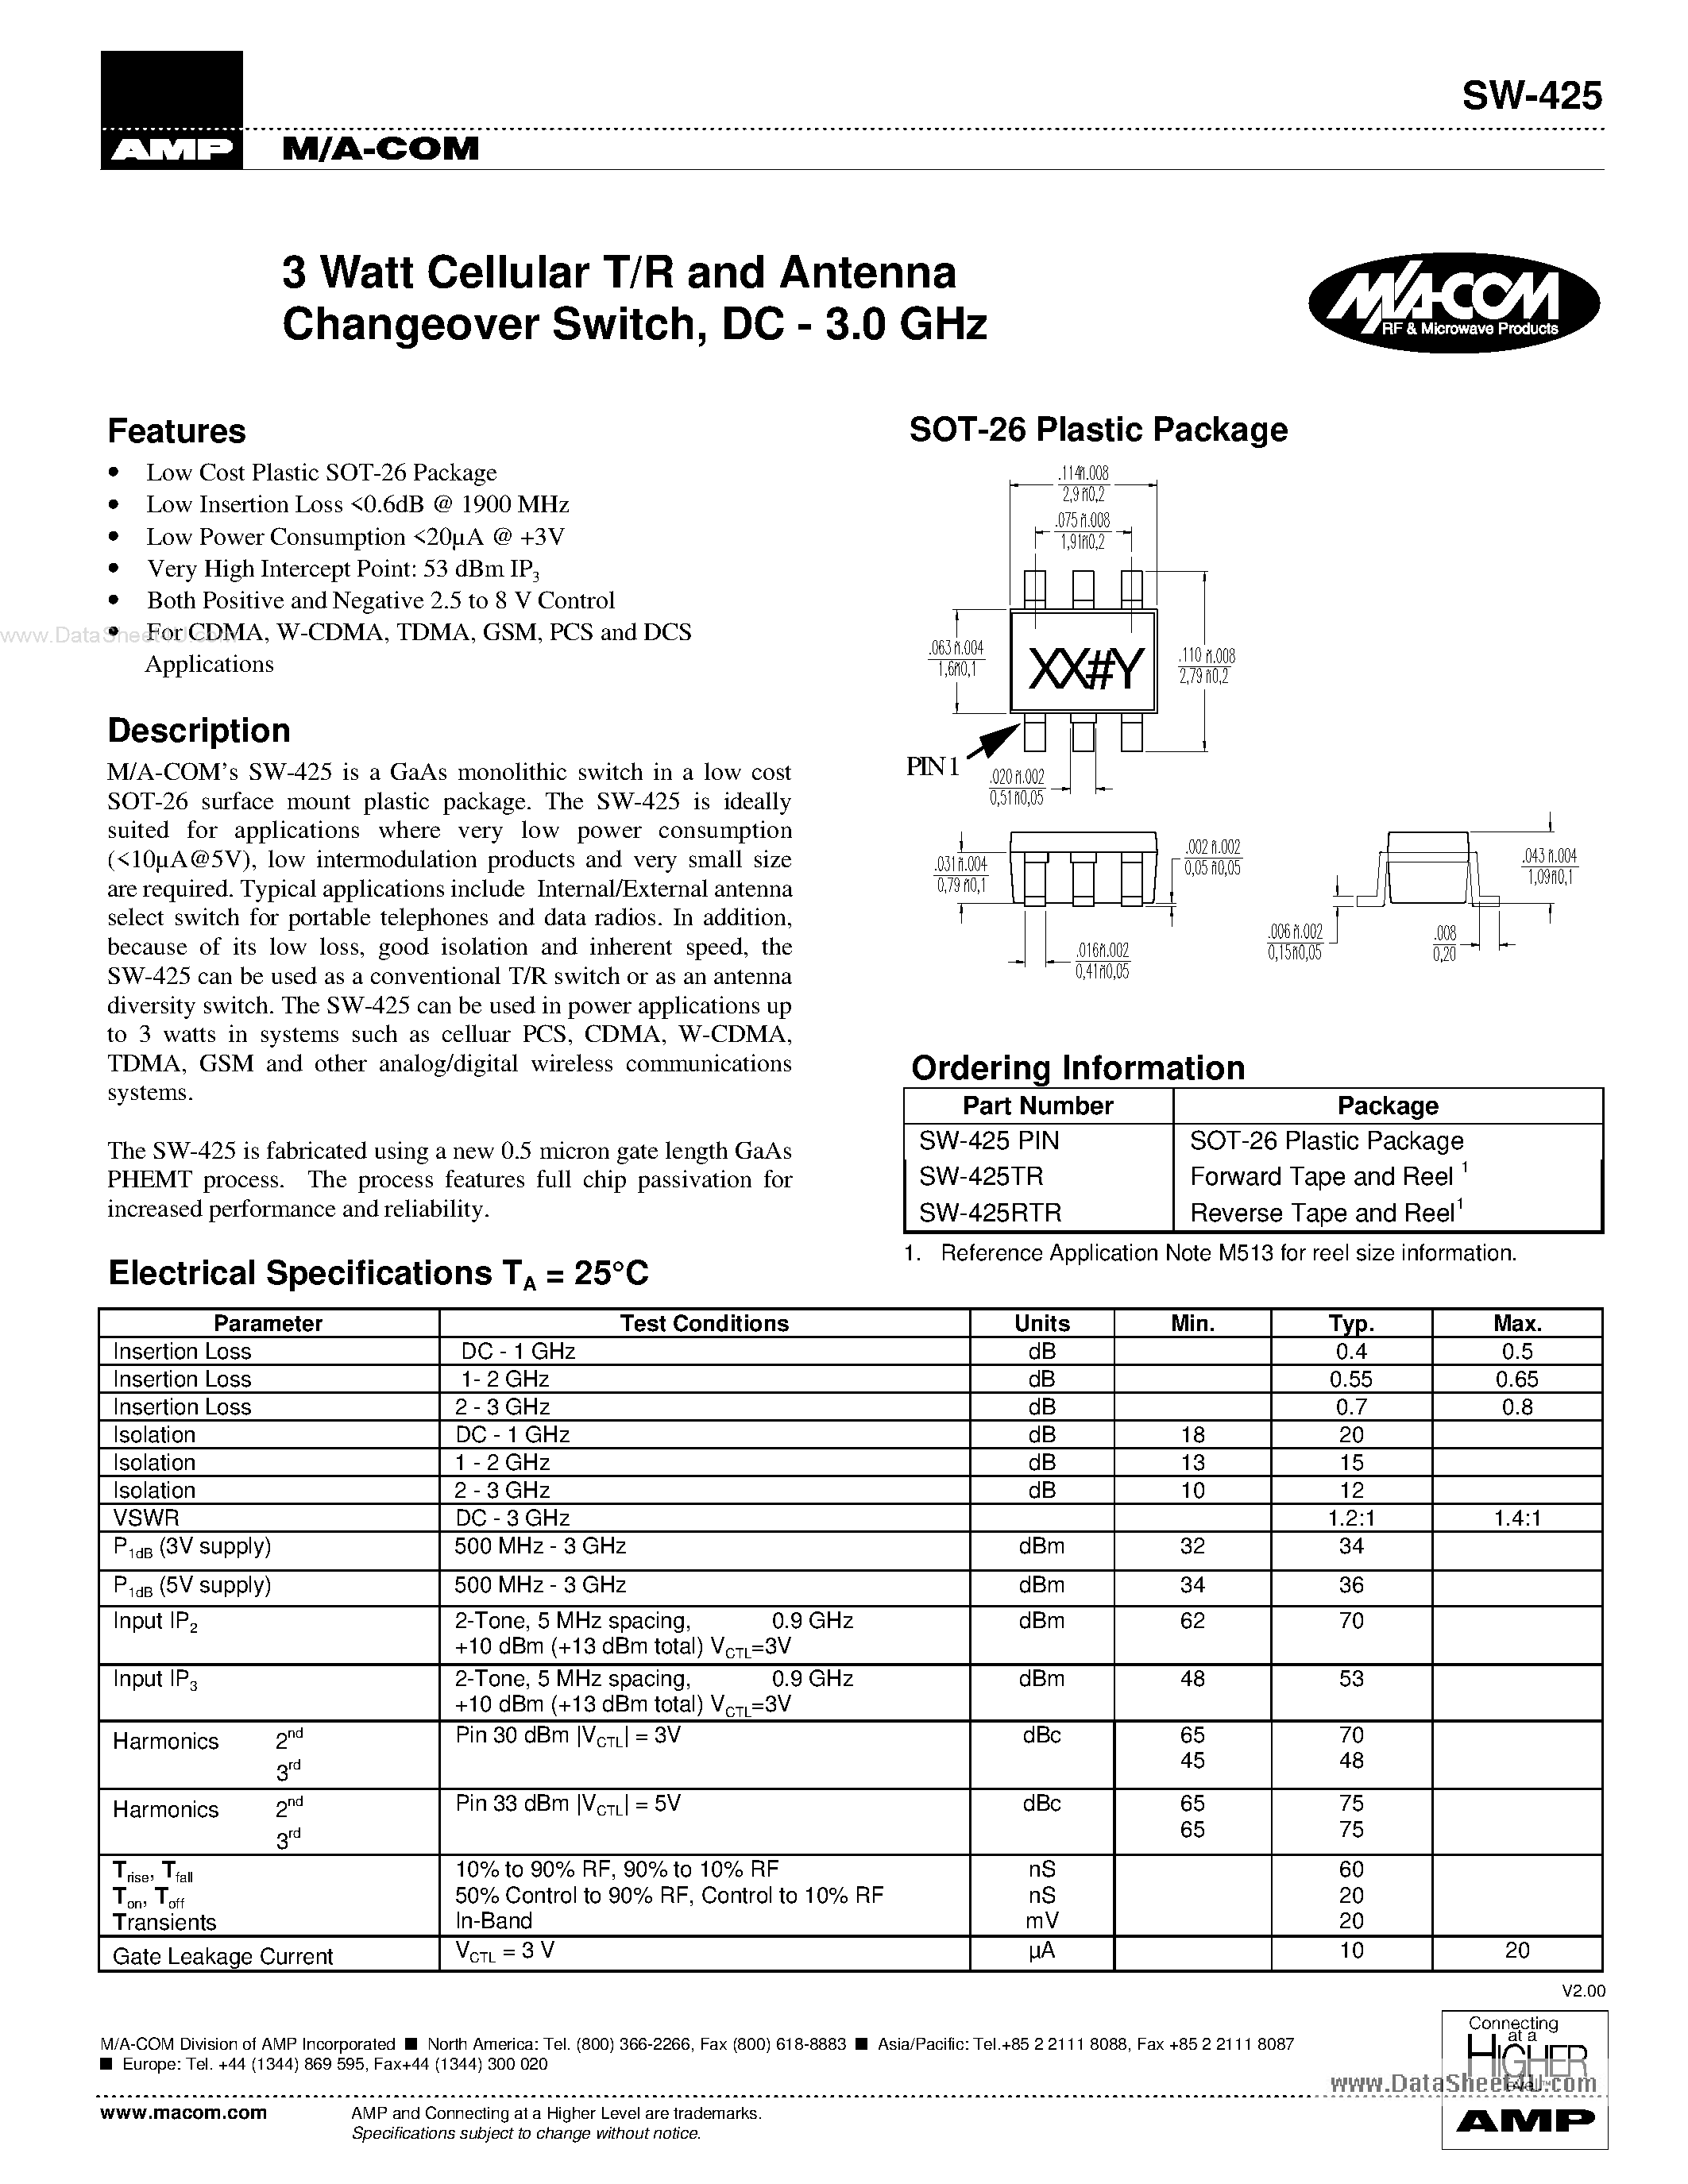 Datasheet SW425 - 3 Watt Cellular T/R and Antenna Changeover Switch page 1